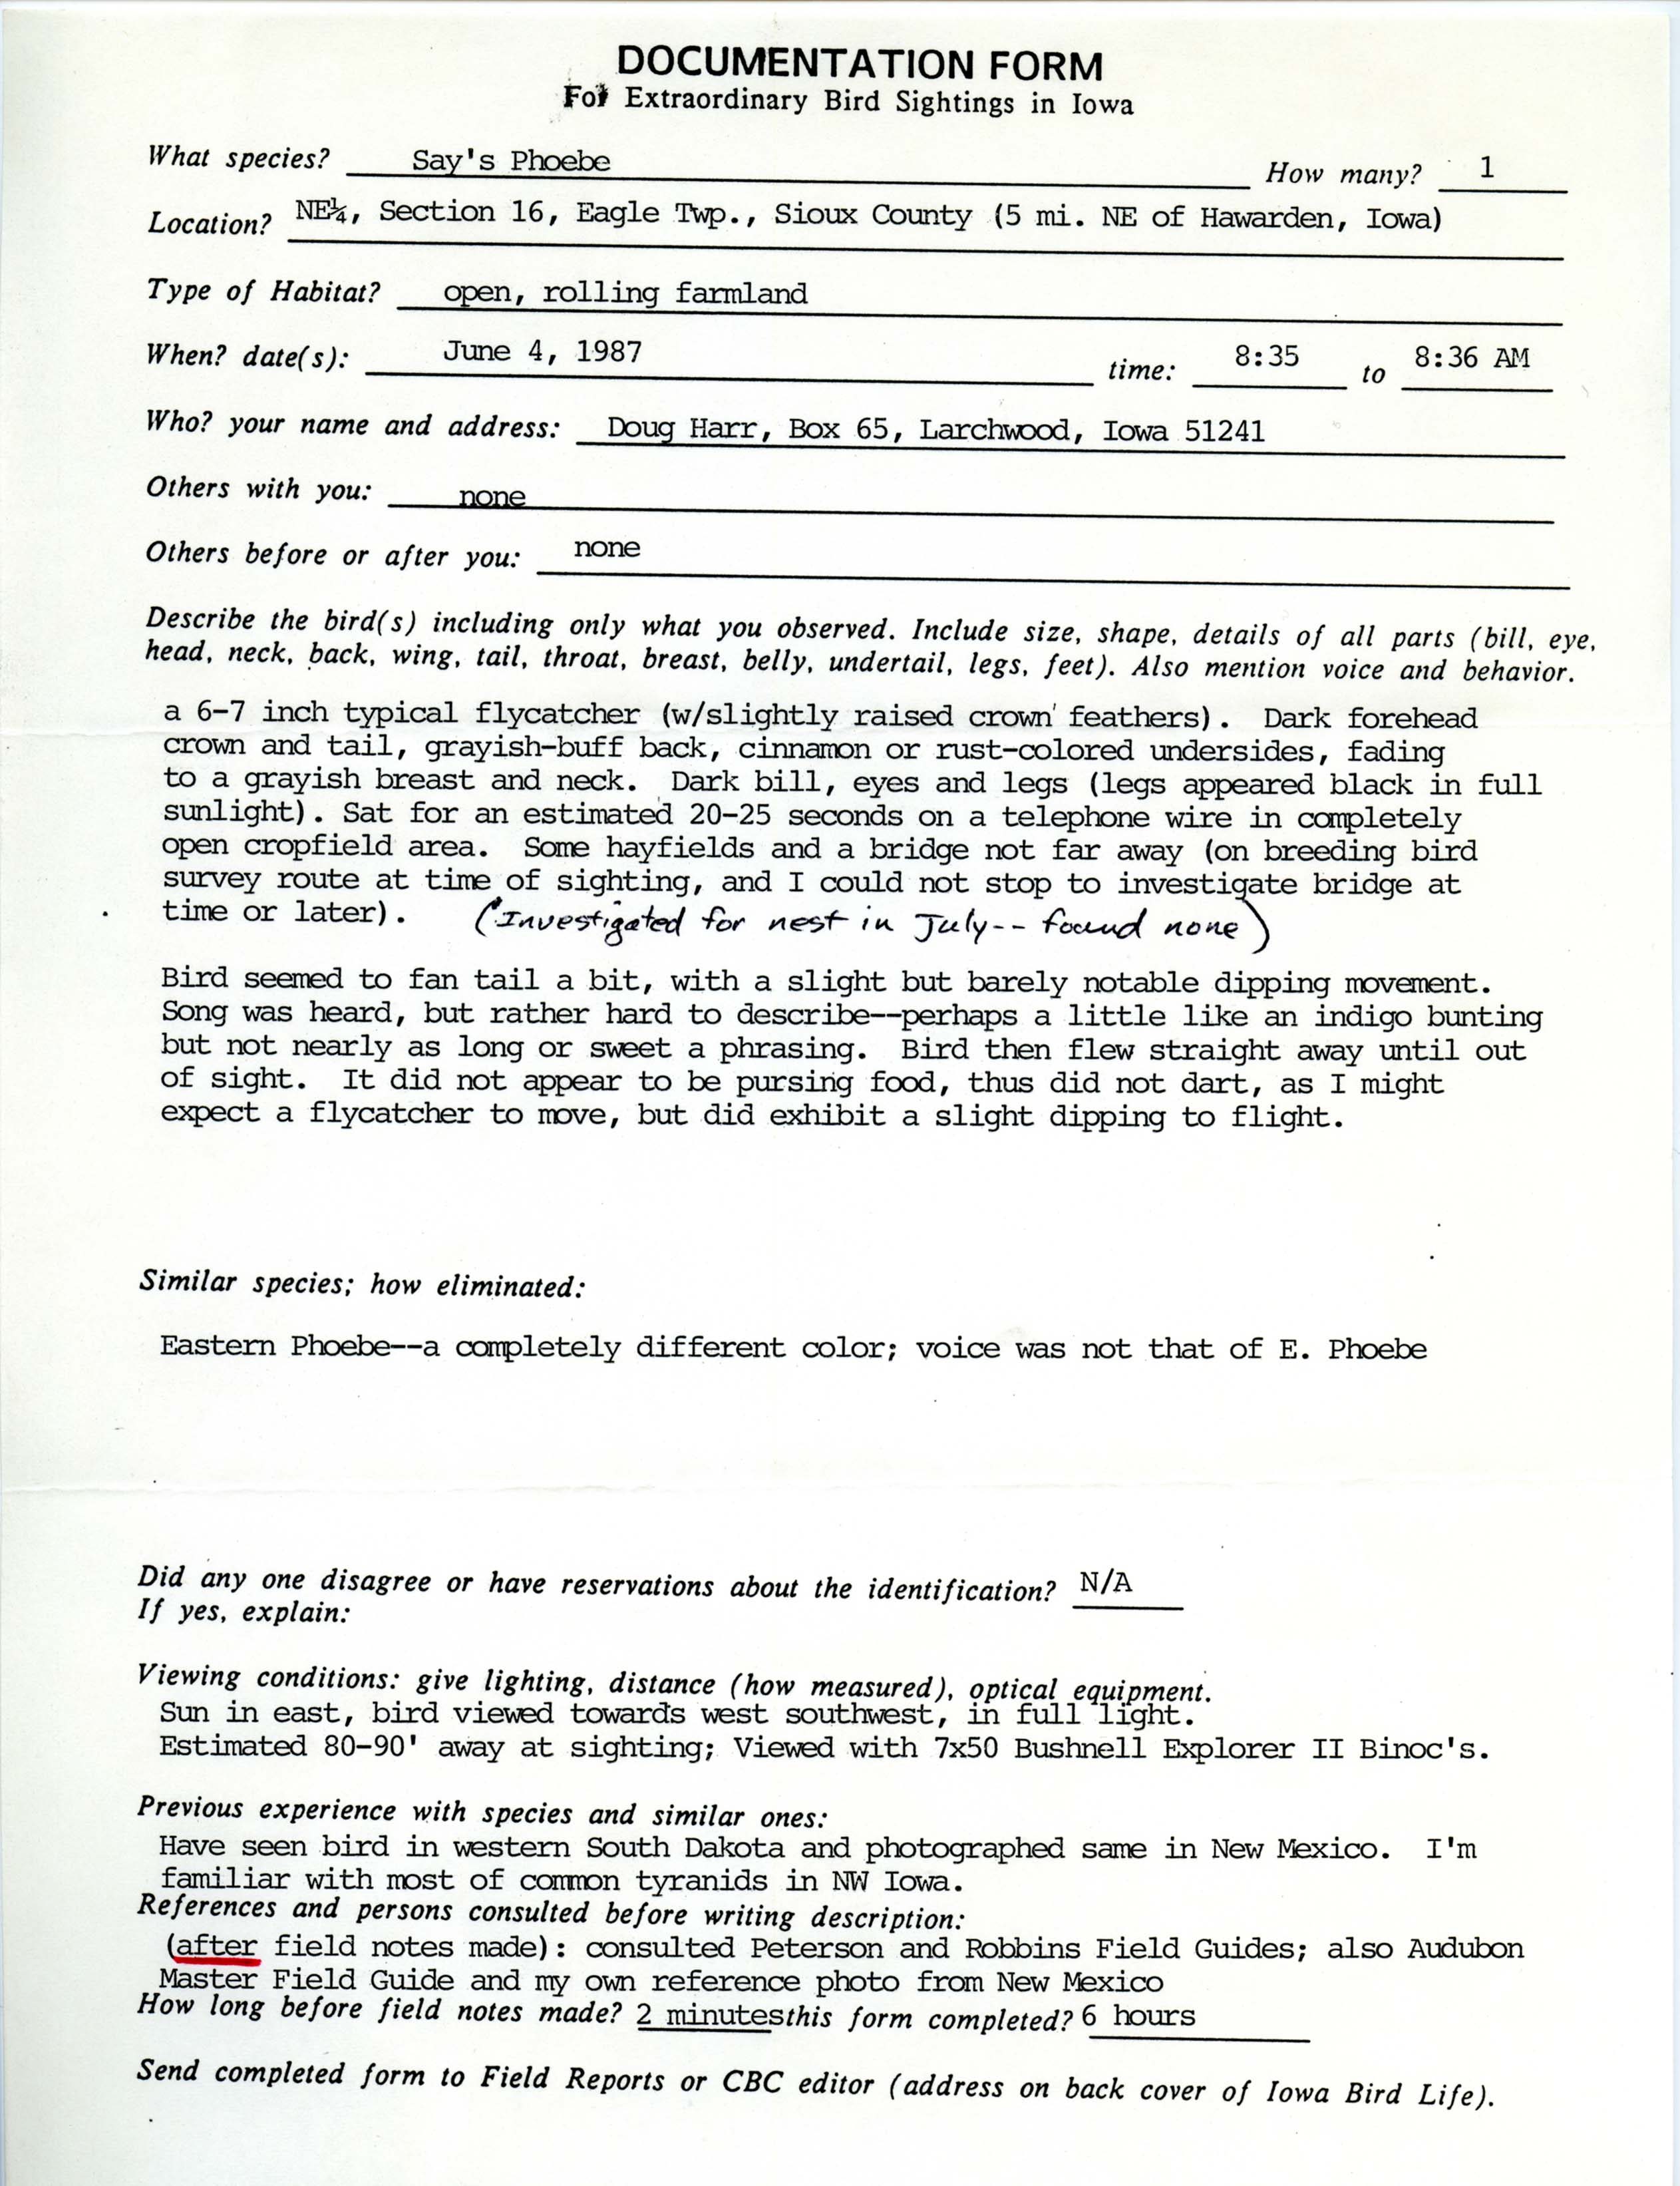 Rare bird documentation form for Say's Phoebe at Eagle Township in Sioux County, 1987